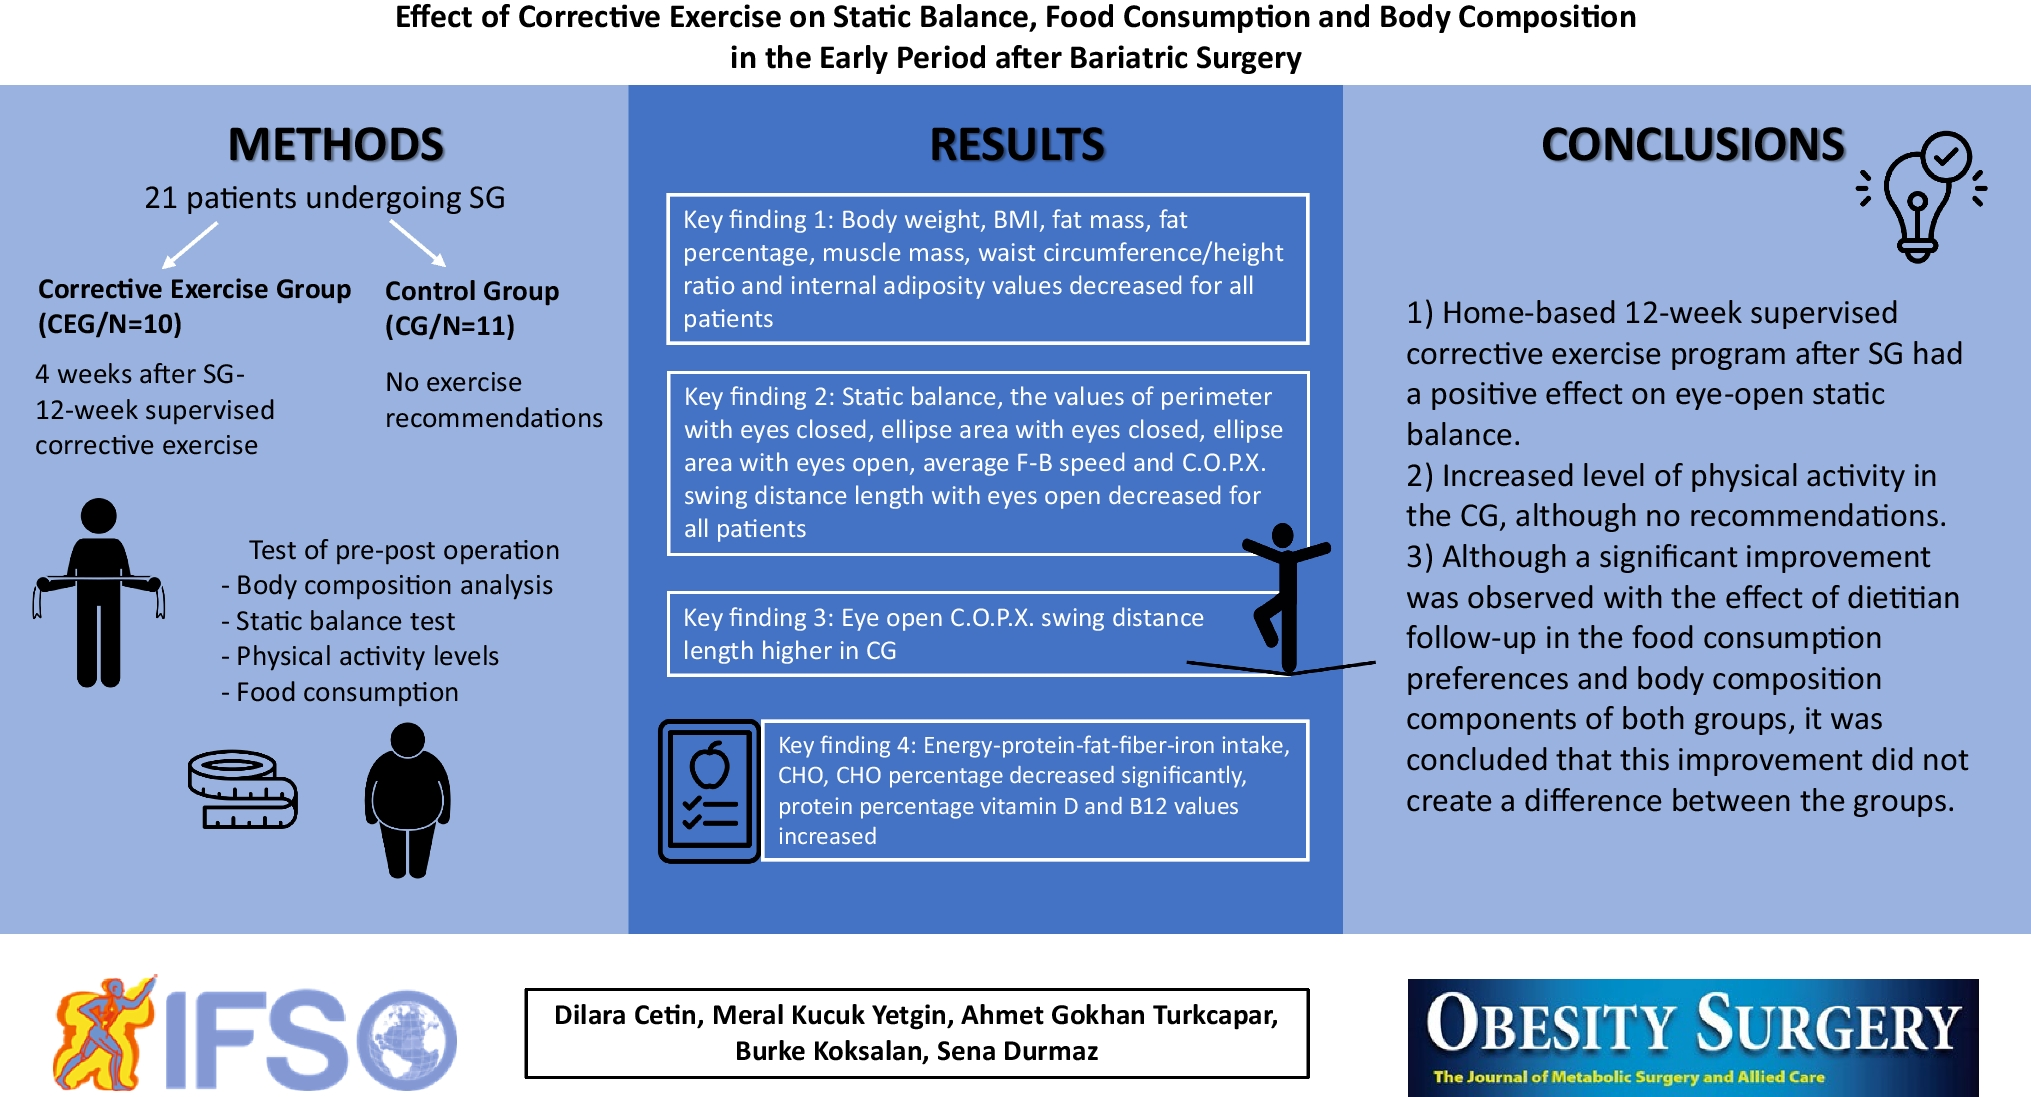 Effect of Corrective Exercise on Static Balance, Food Consumption, and Body Composition in the Early Period After Bariatric Surgery